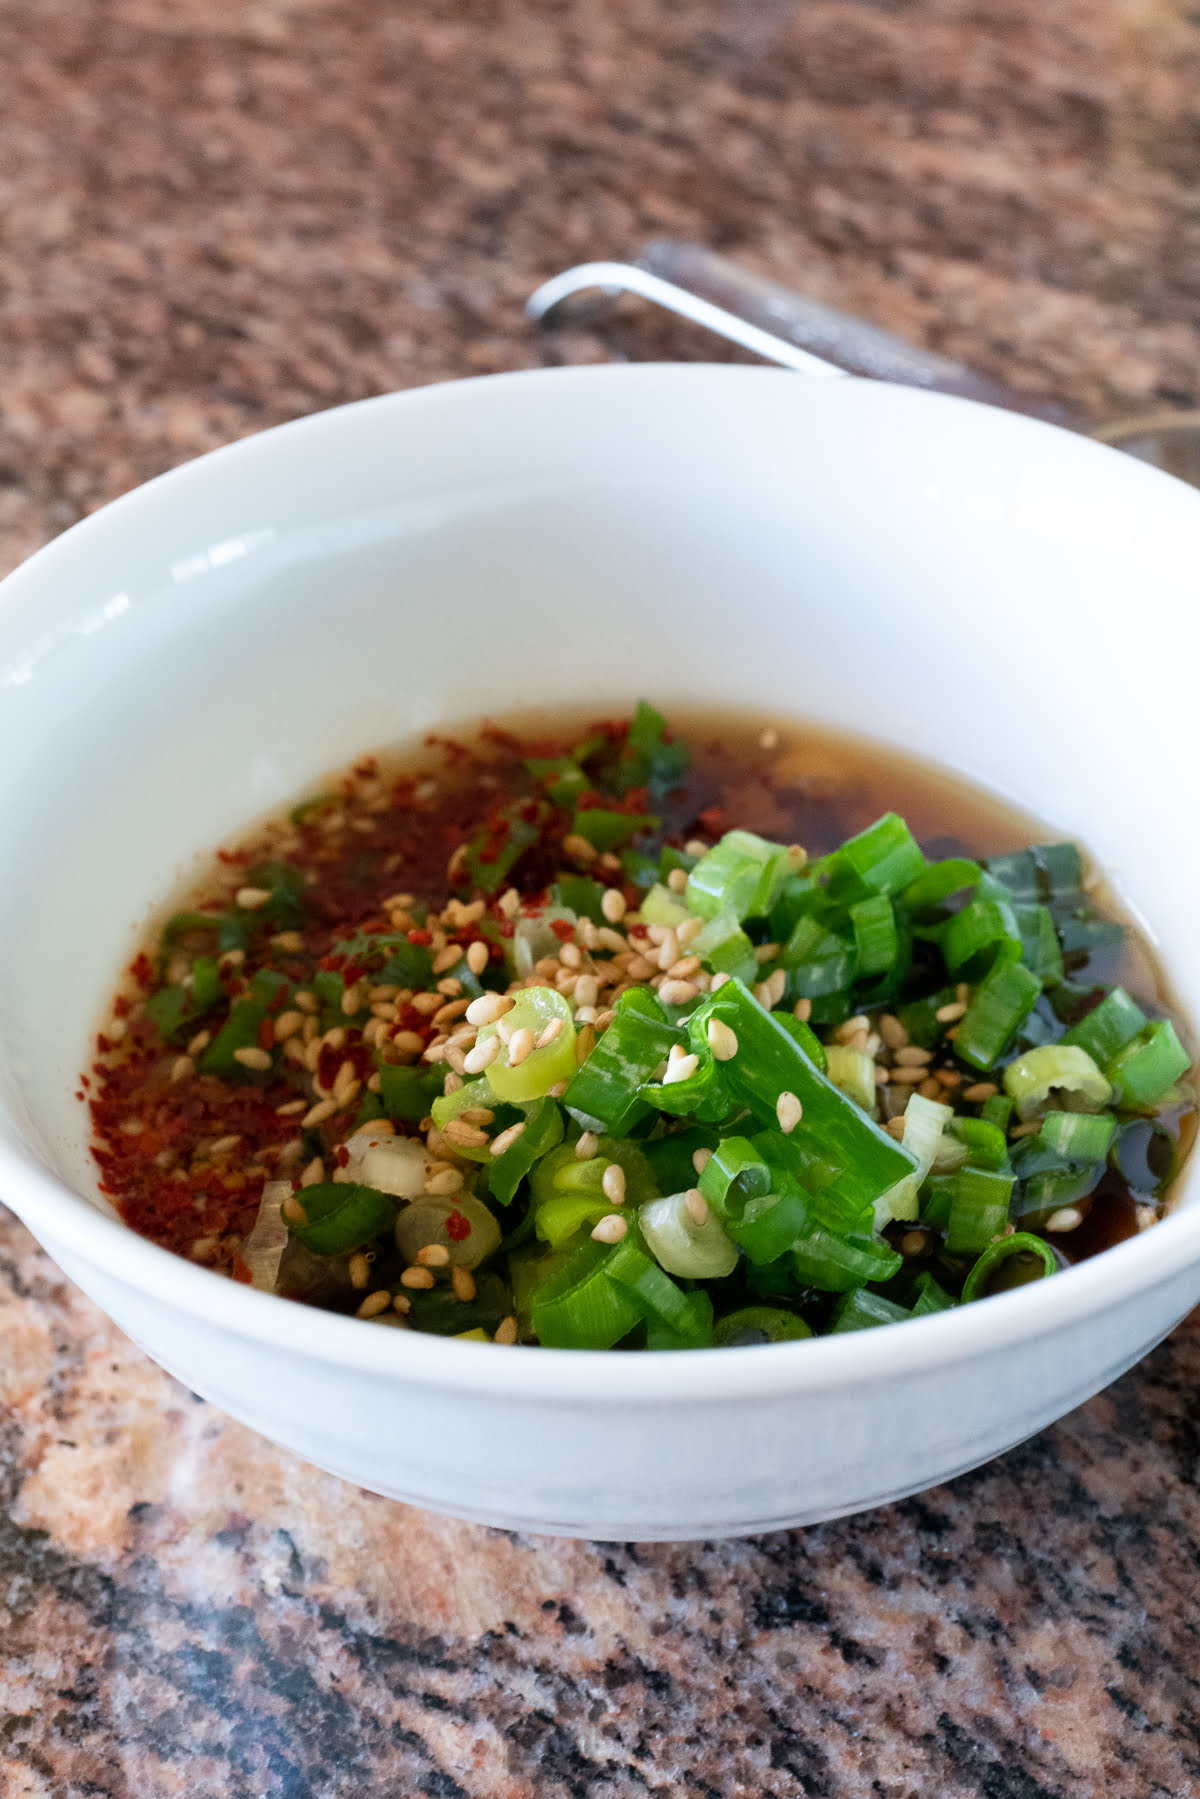 Meat jun dipping sauce made from soy sauce, rice vinegar, sesame oil, Korean chili pepper flakes (optional), garlic cloves, and green onions.